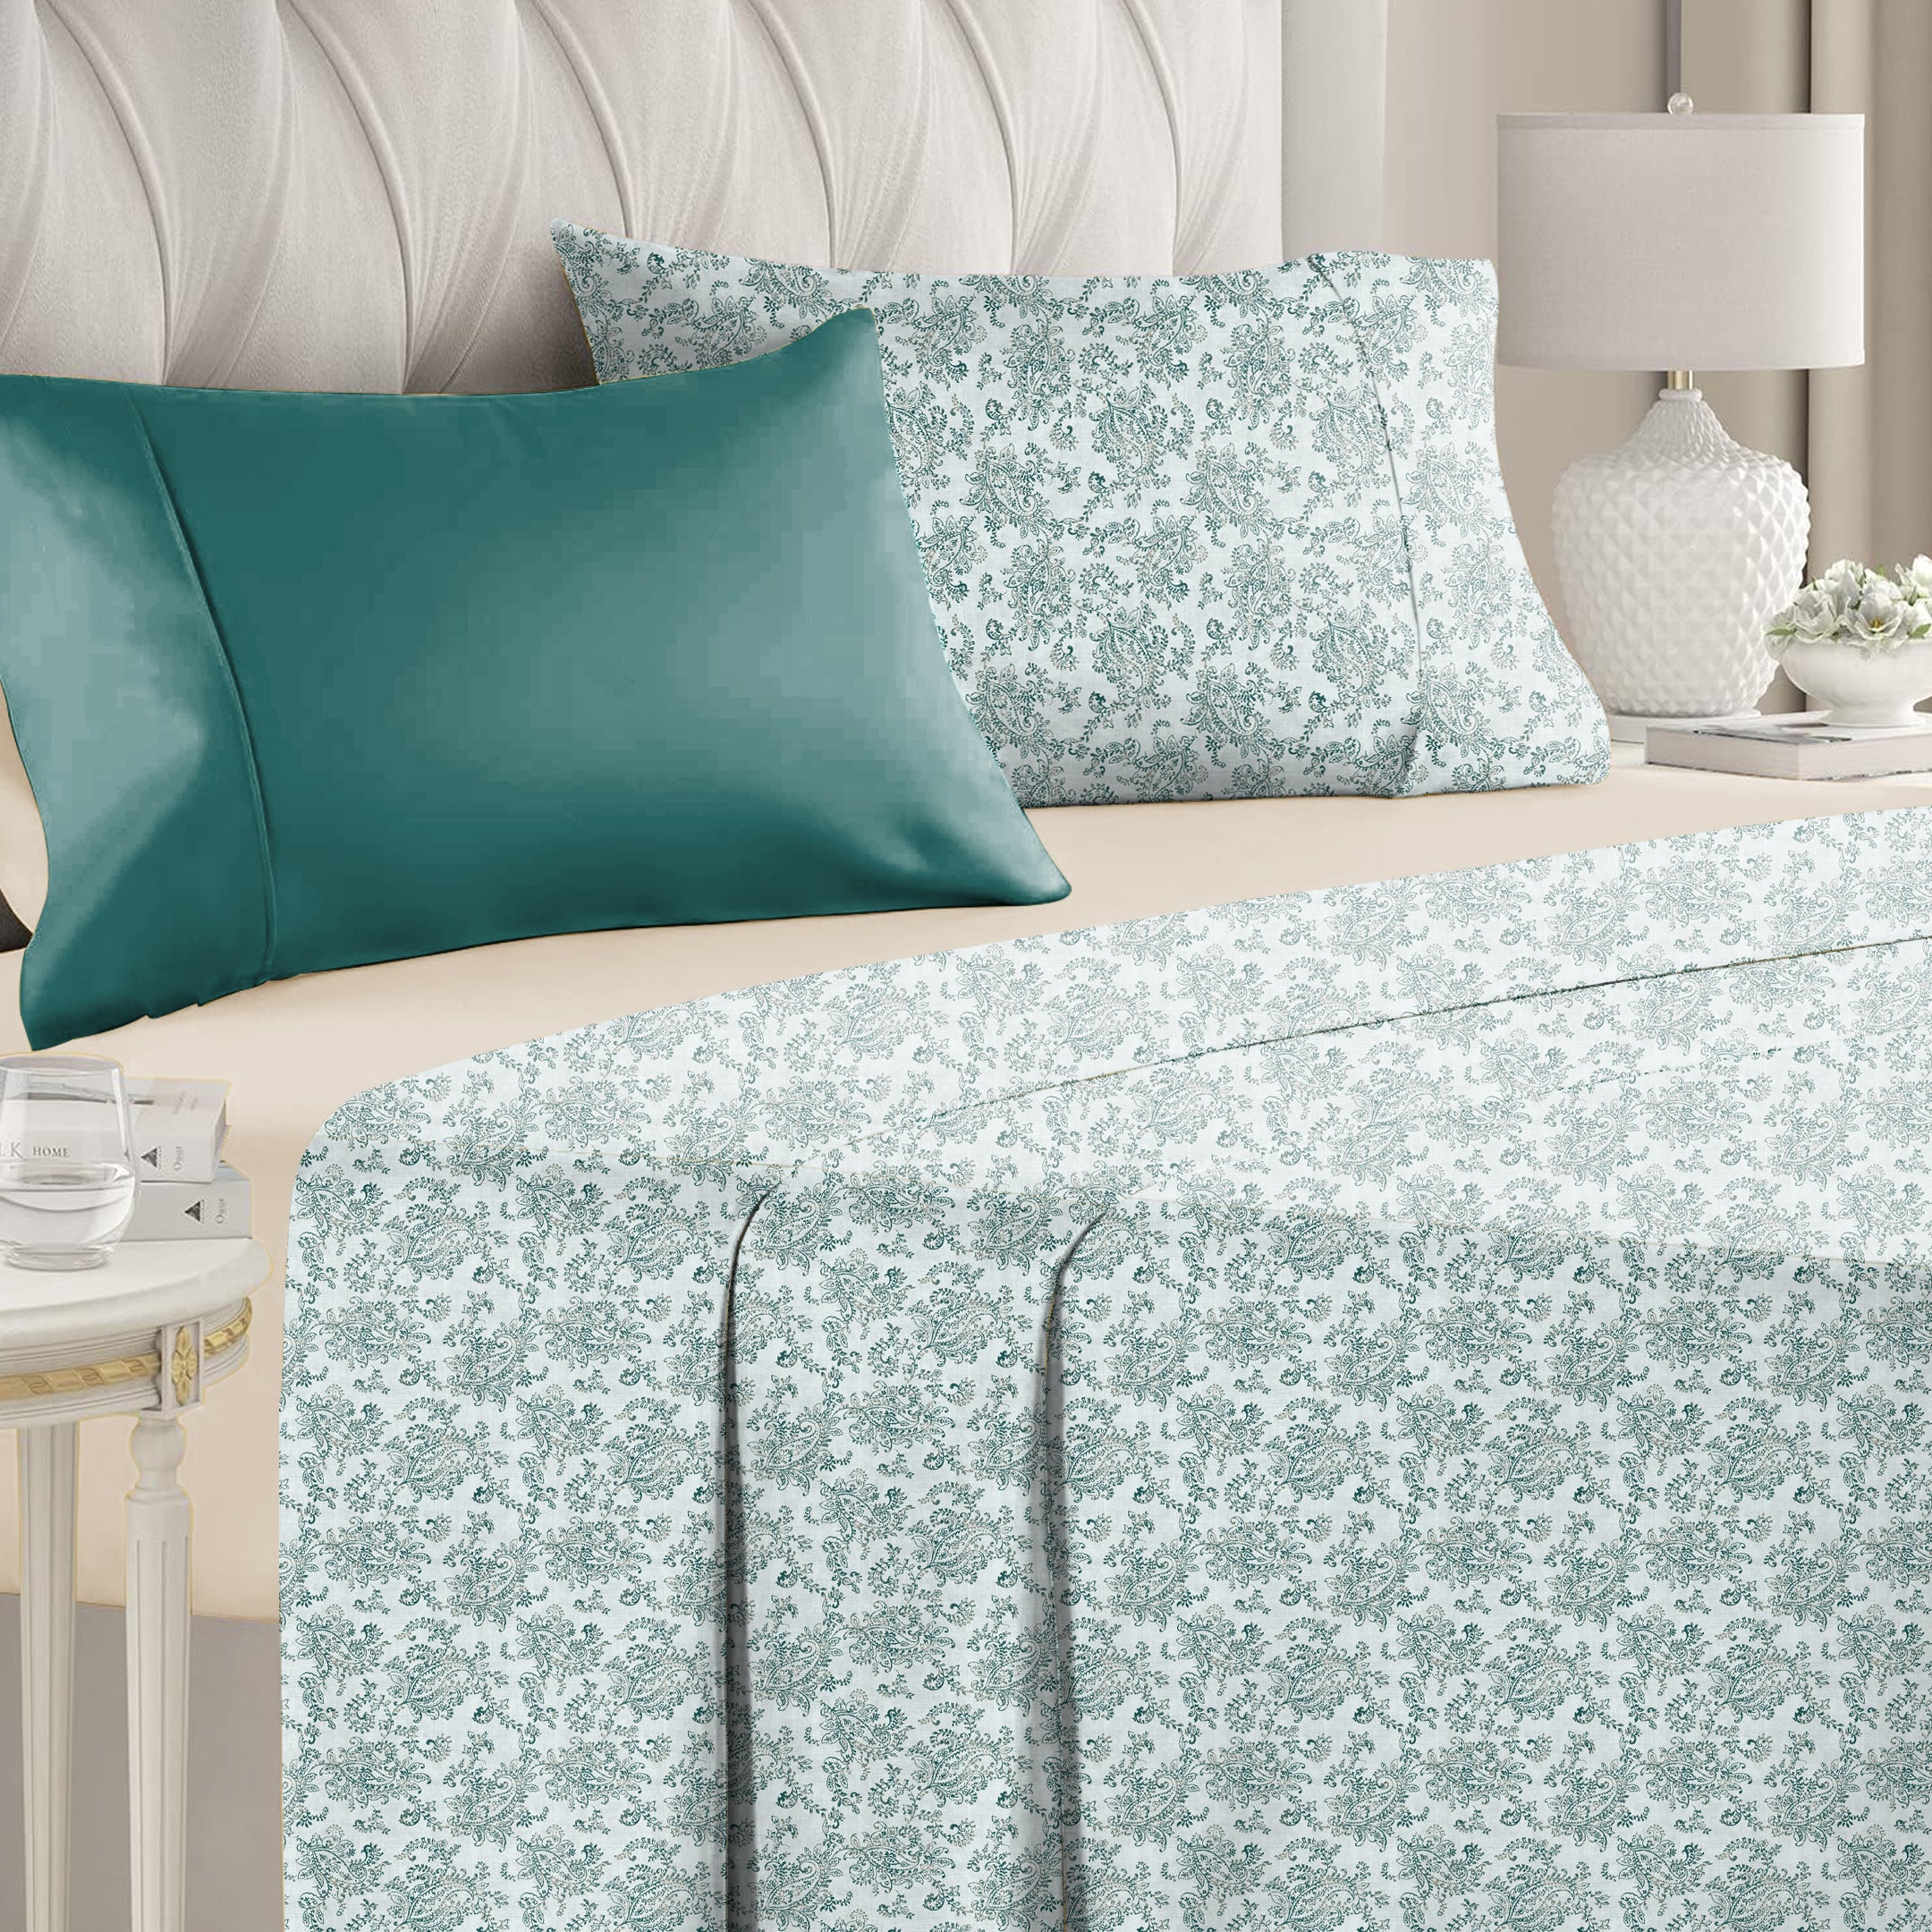 Jodhpur Flowers Bedsheet for Double Bed with 2 PillowCovers King Size (104" X 90") White And Teal